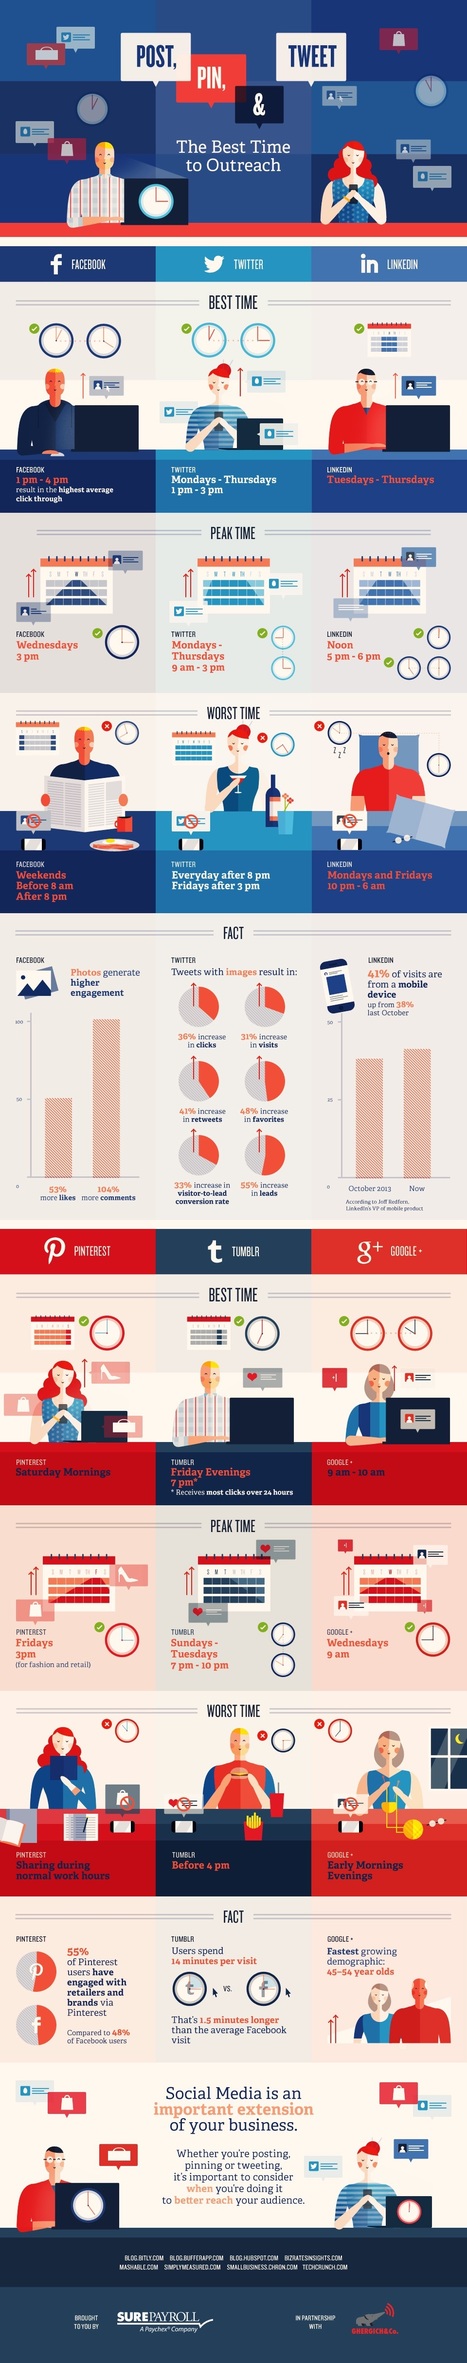 The Best and Worst Times to Post, Pin & Tweet [Infographic] | Public Relations & Social Marketing Insight | Scoop.it